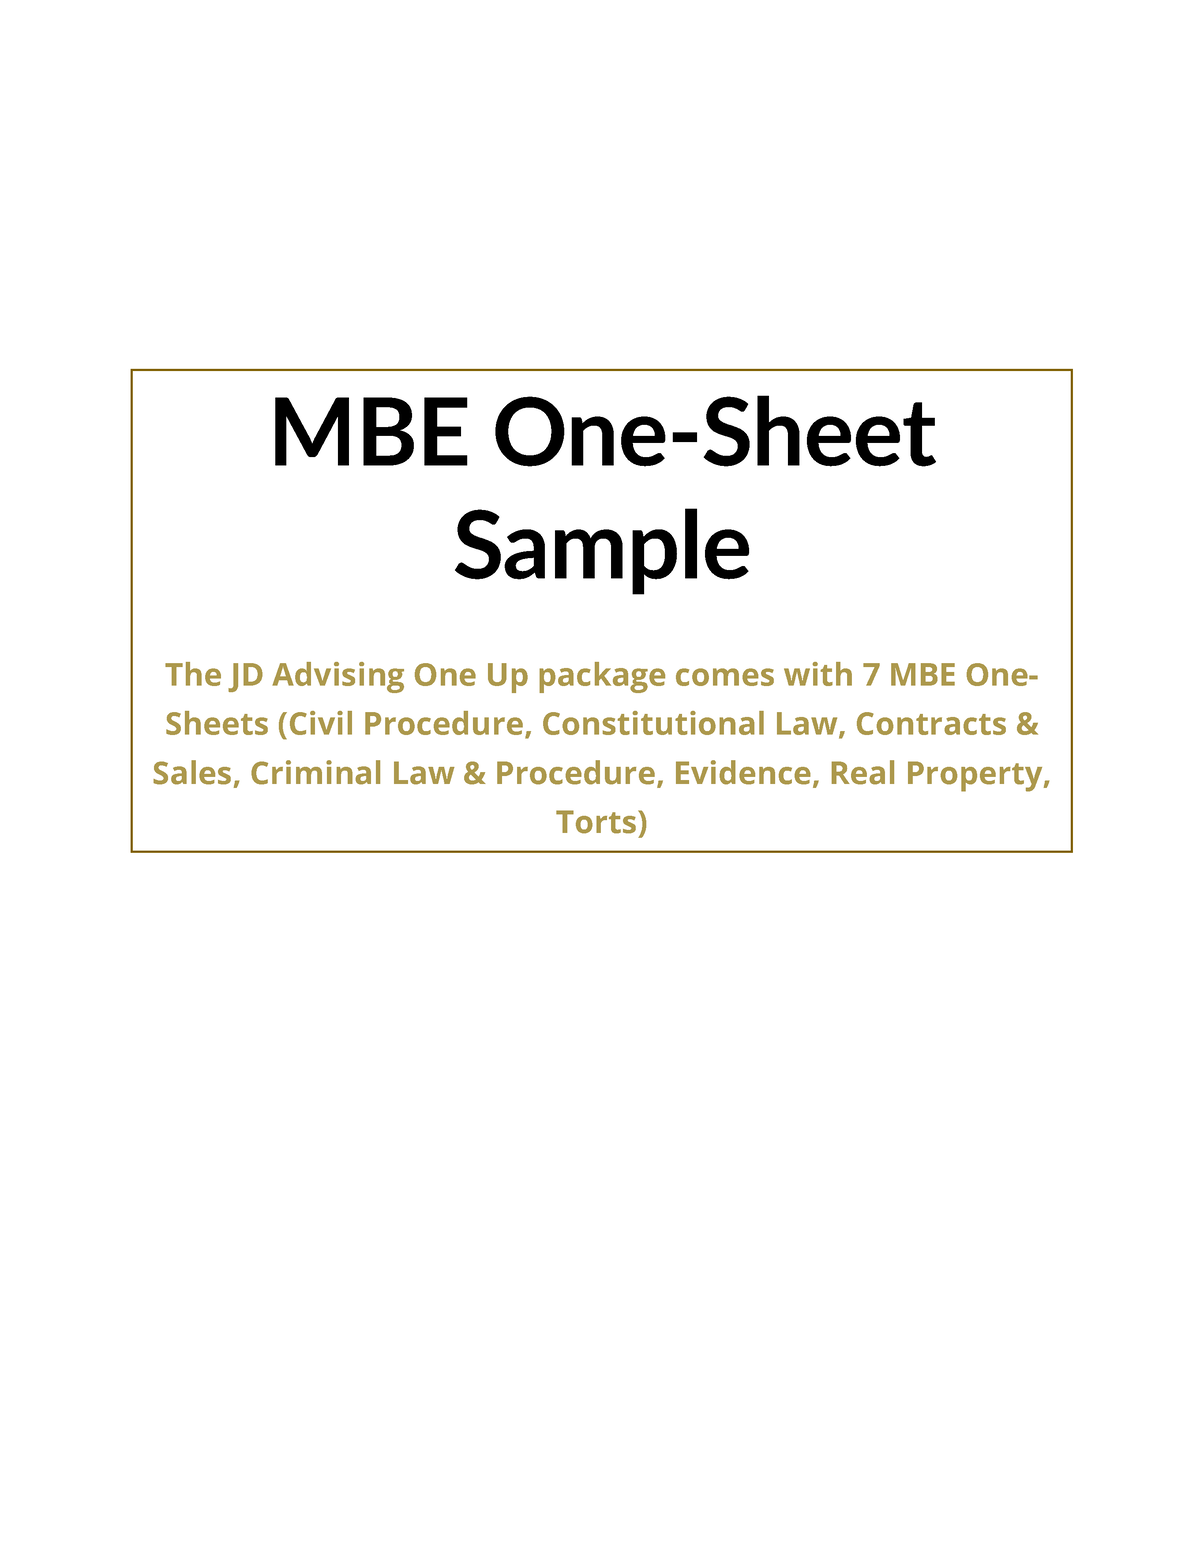 Jd One Up Sample Bar Prep Lecture Notes And Practice Mbe One Sheet Sample The Jd Advising 1389